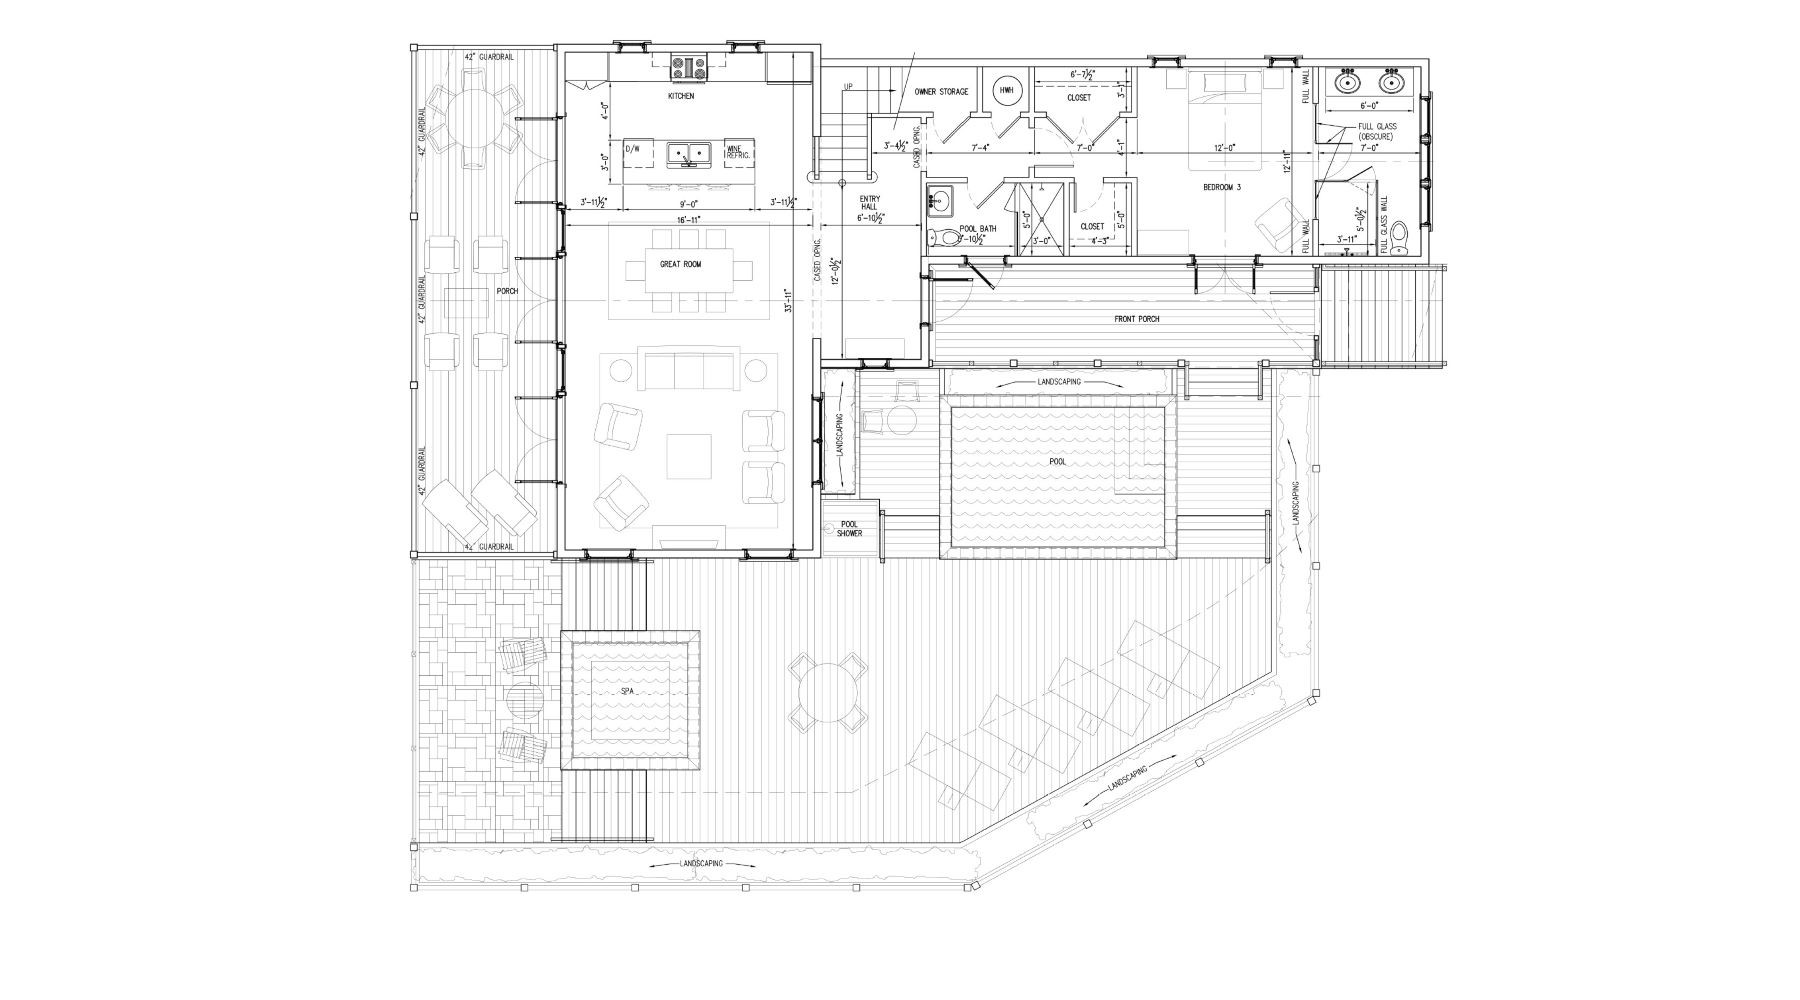 Floor plan of the 2nd floor of a of a luxury beachfront property in The Ridge neighborhood at The Abaco Club